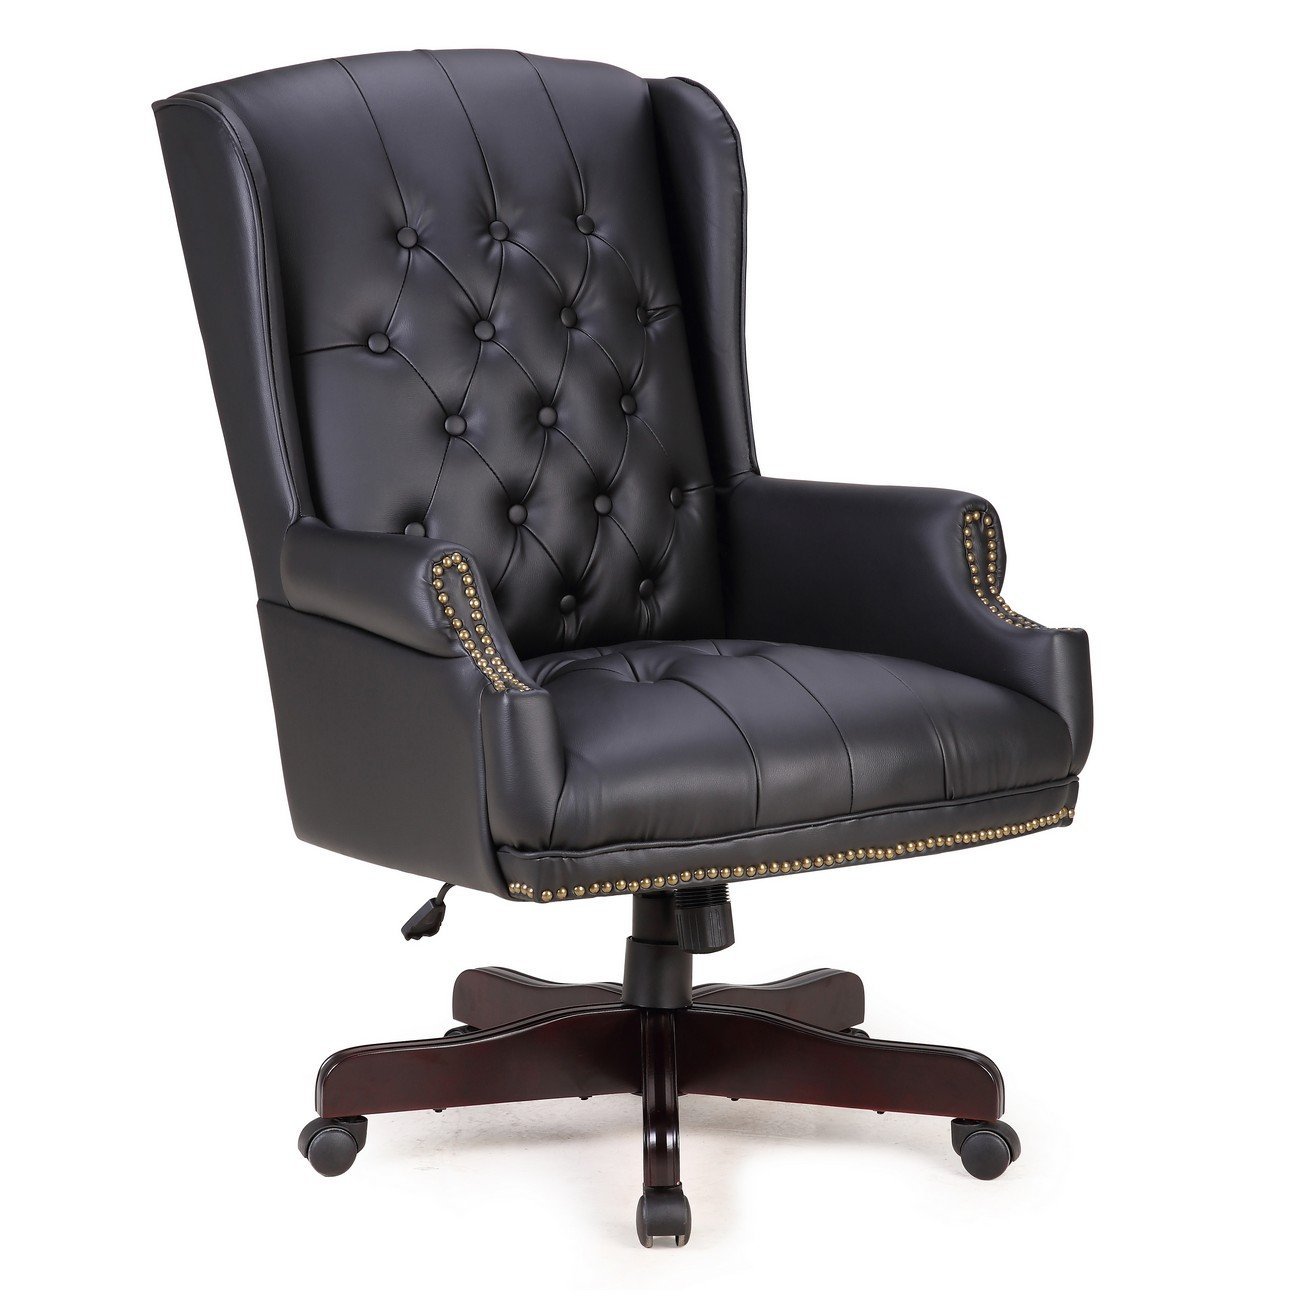 4 Most Comfortable Office Chairs Under 200